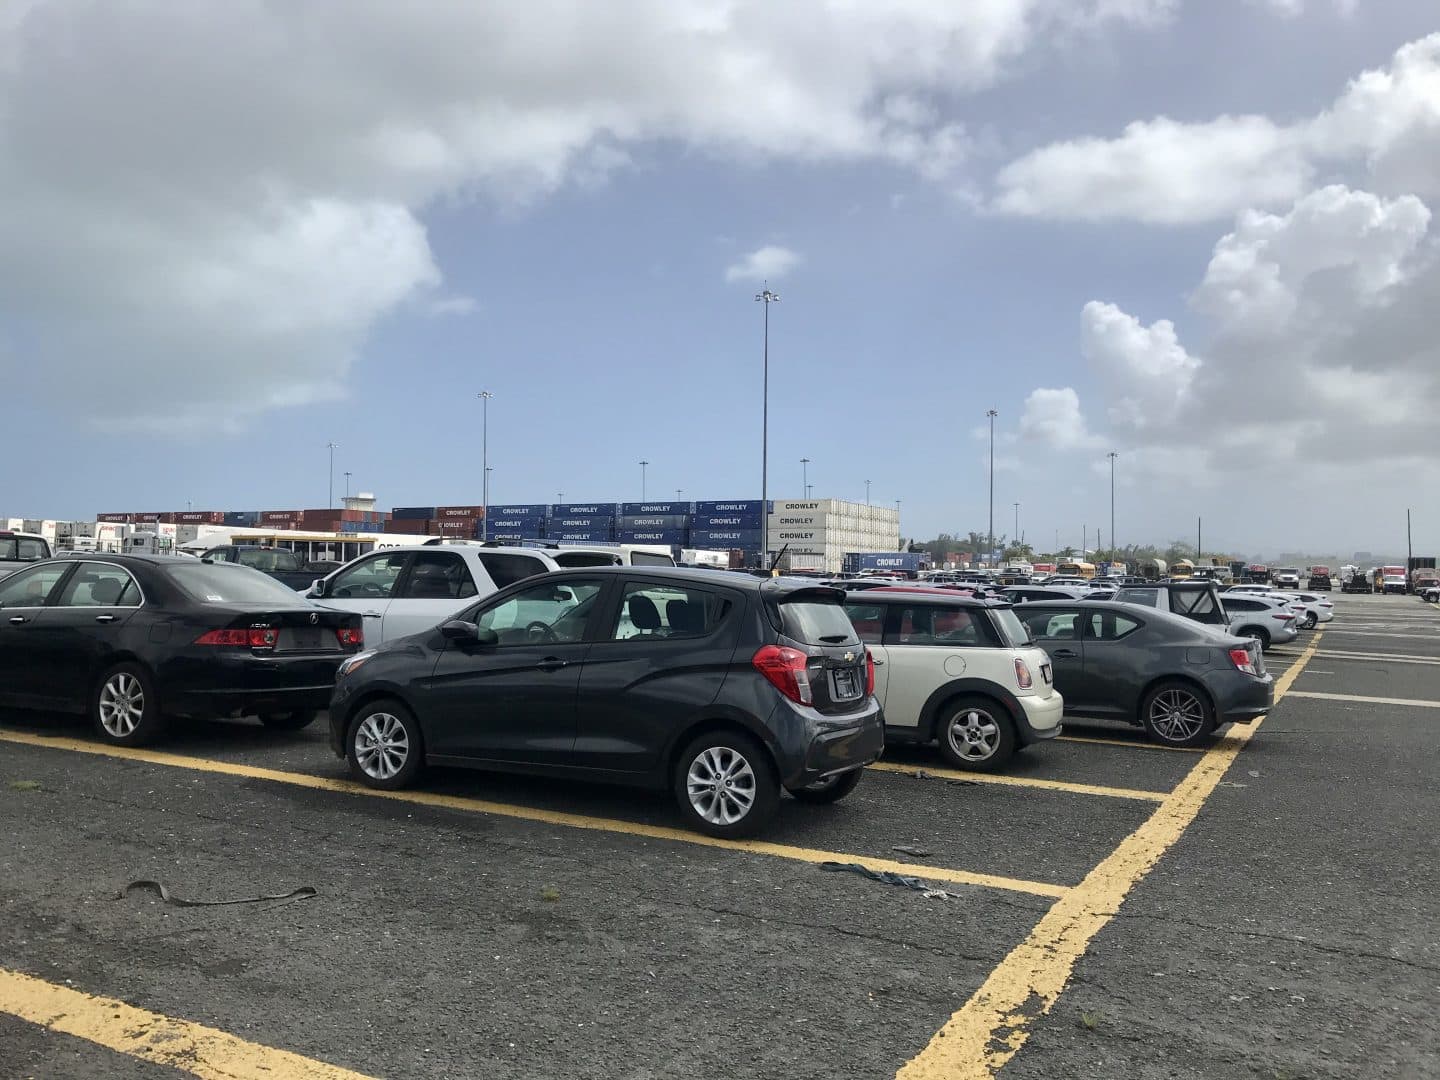 Puerto Rico Car Transport Review: What to Know Before Shipping Your Car